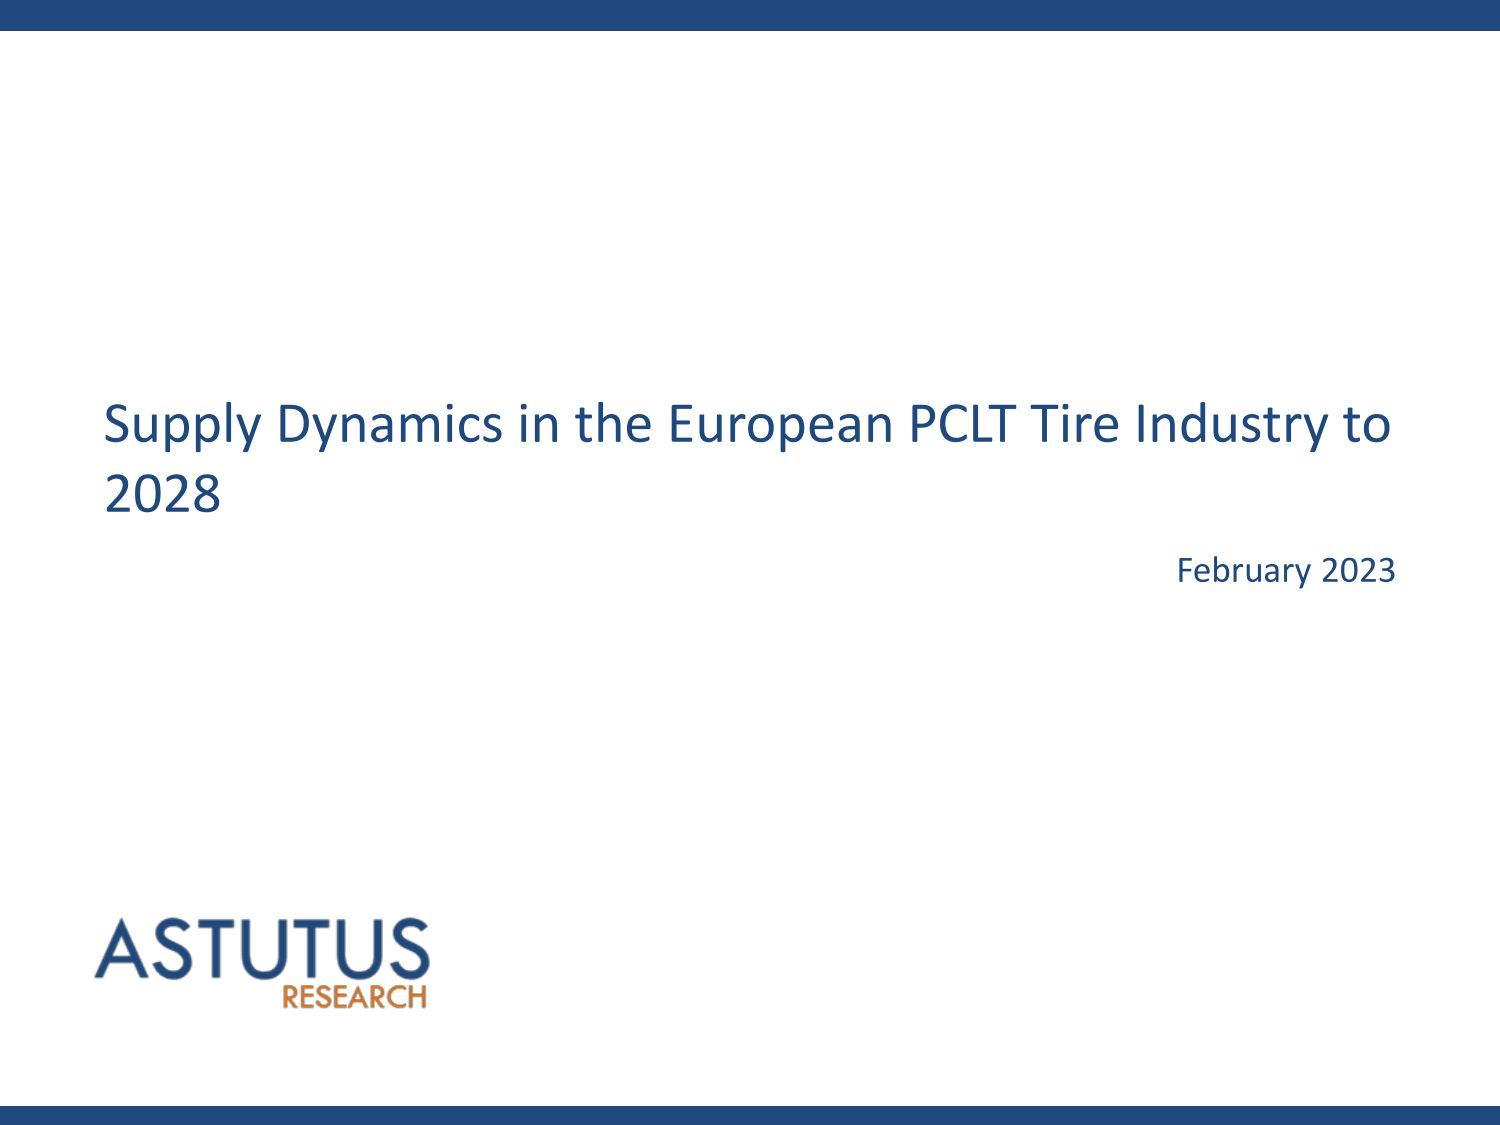 Supply Dynamics in the European PCLT Tire Industry to 2028